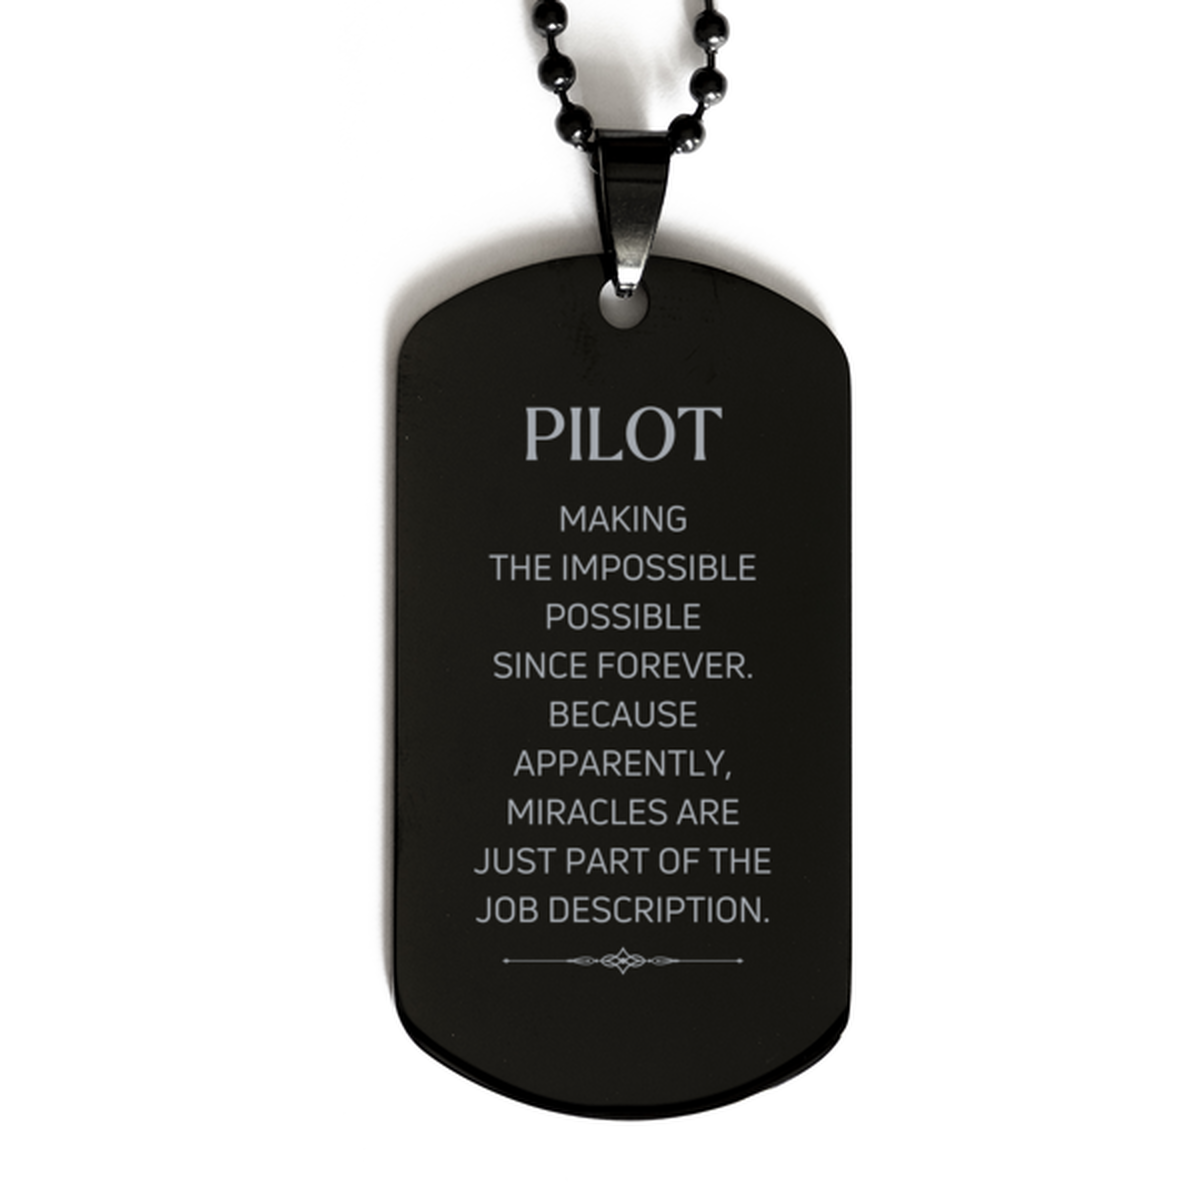 Funny Pilot Gifts, Miracles are just part of the job description, Inspirational Birthday Black Dog Tag For Pilot, Men, Women, Coworkers, Friends, Boss